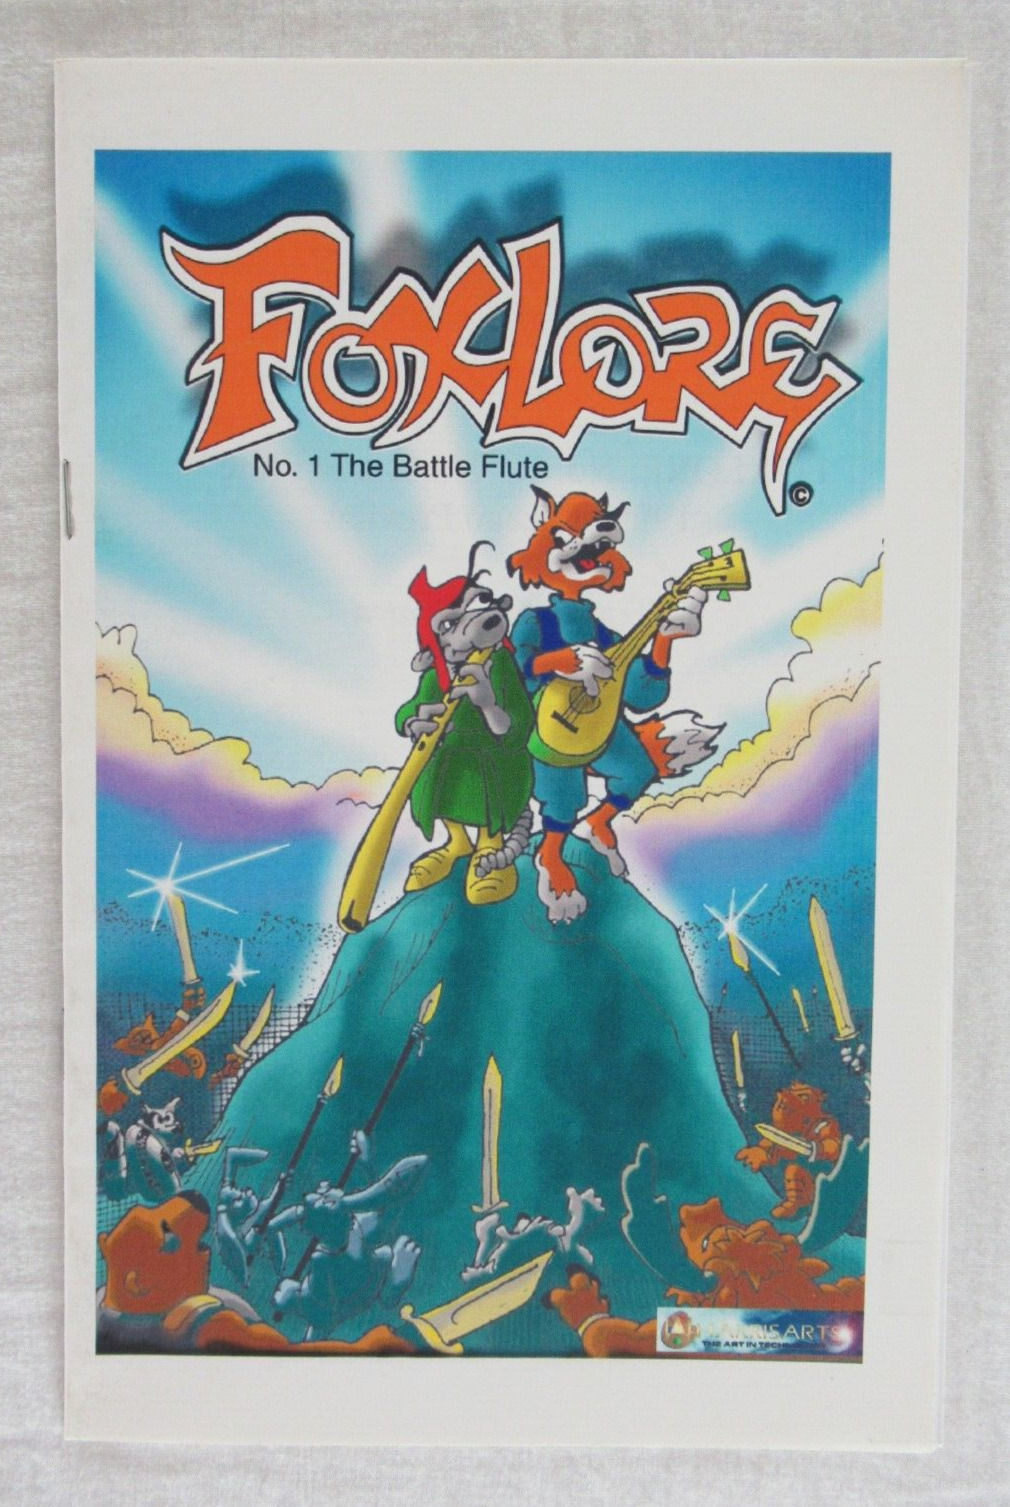 Foxlore #1 The Battle Flute 1999 Chicago Preview Convention Exclusive Ashcan